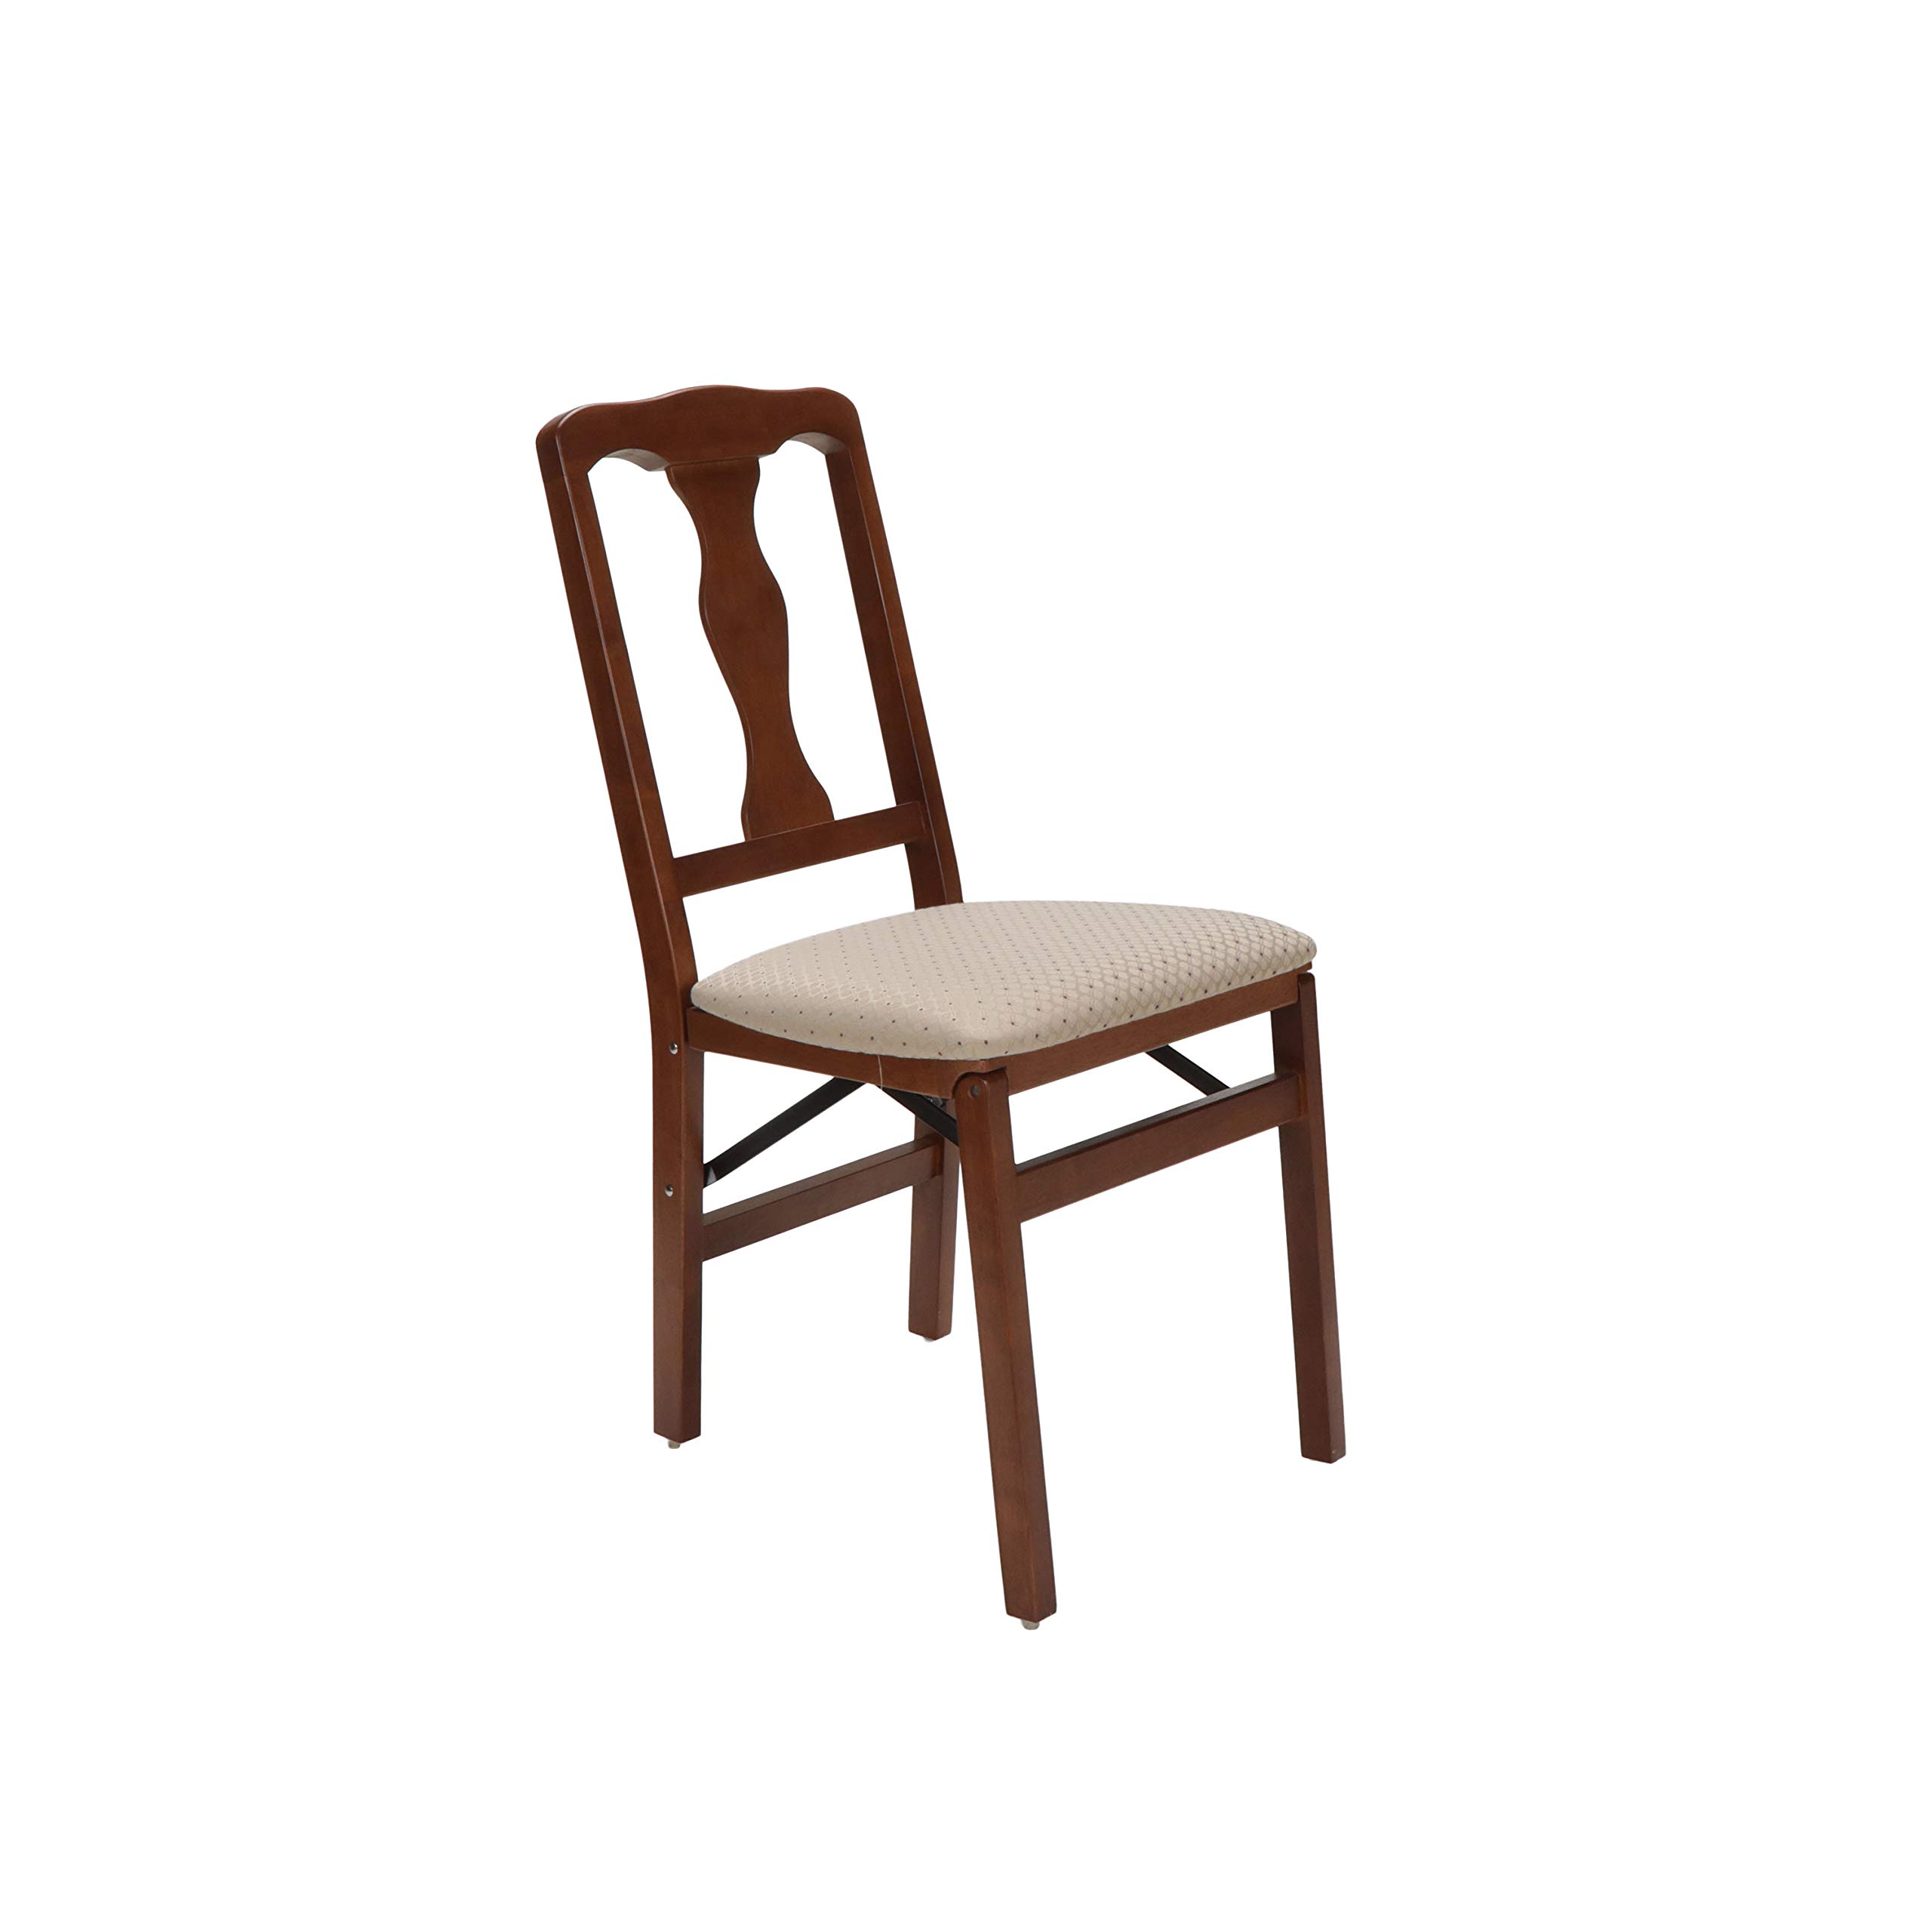 Meco Stakmore Queen Anne Folding Chair Cherry Finish, Set Of 2,